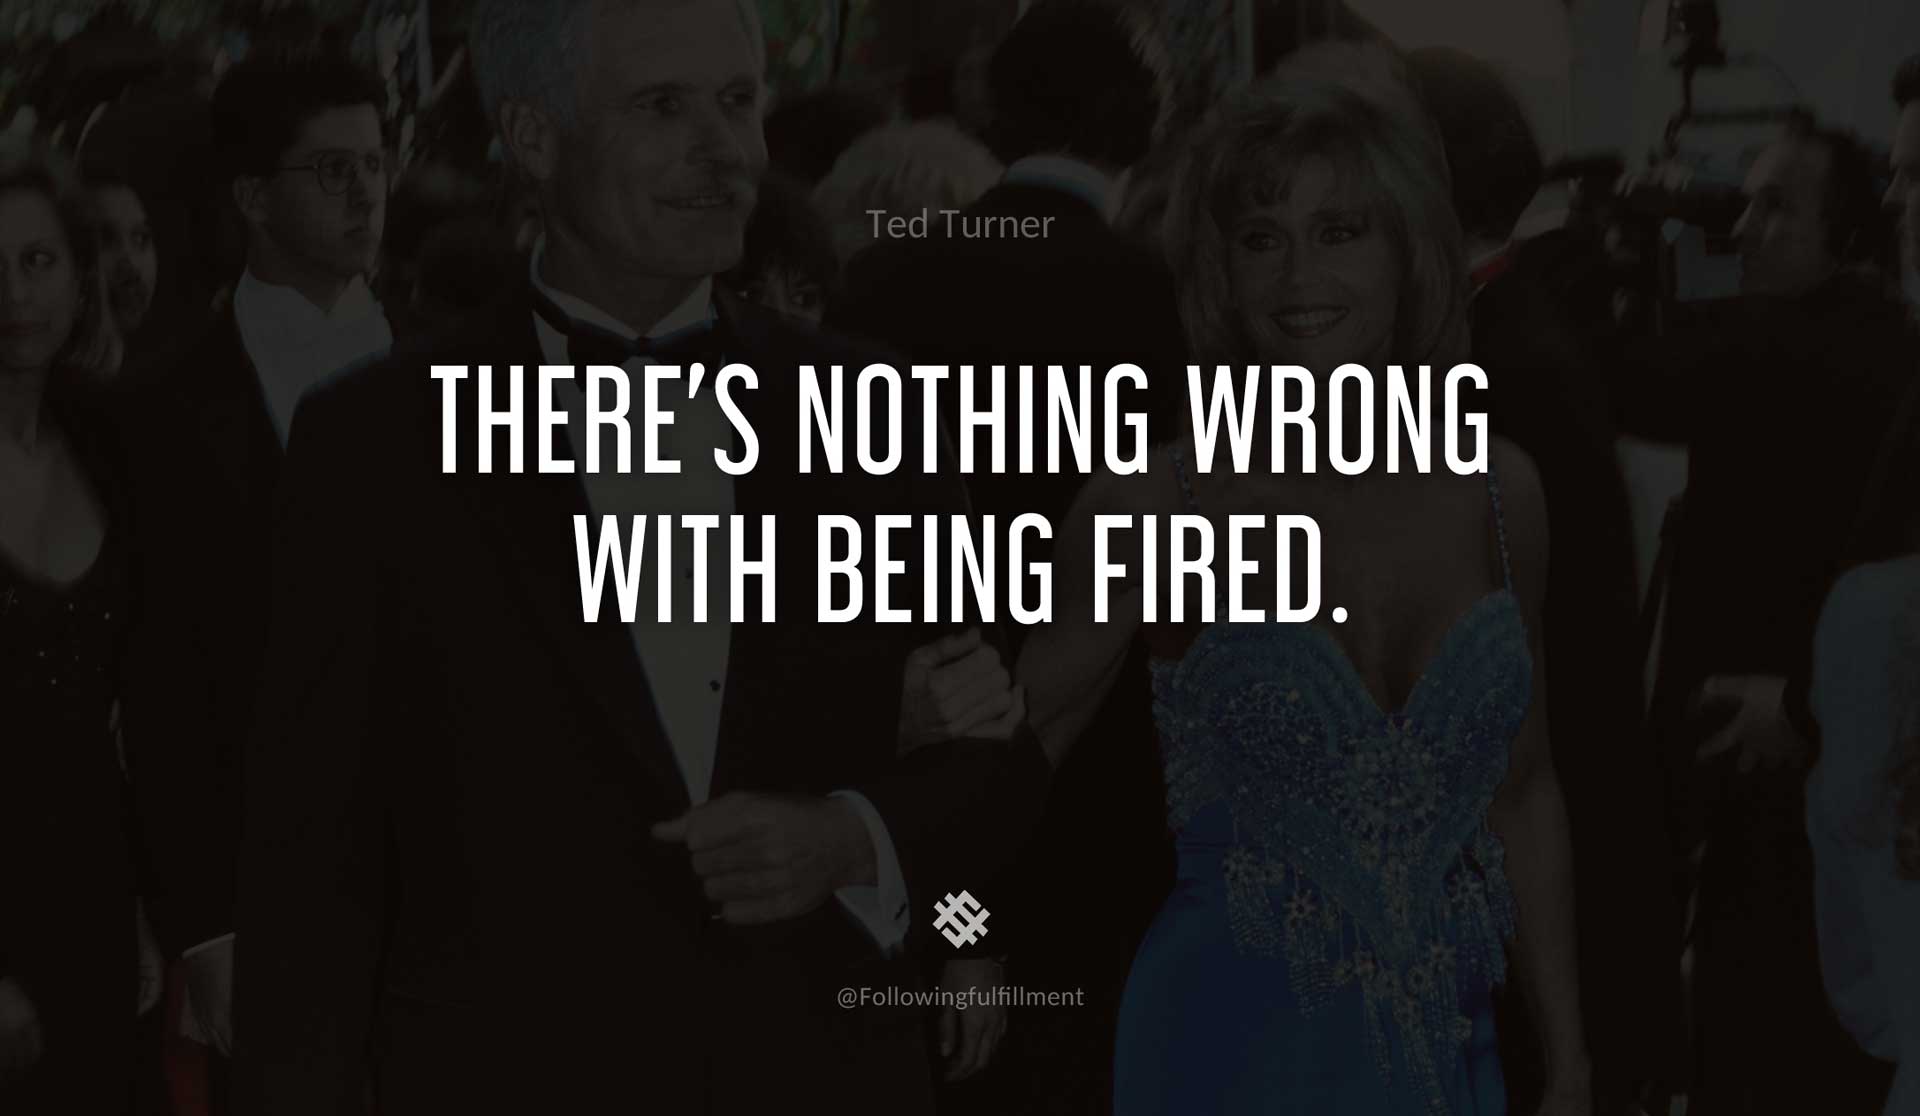 There's-nothing-wrong-with-being-fired.-TED-TURNER-Quote.jpg